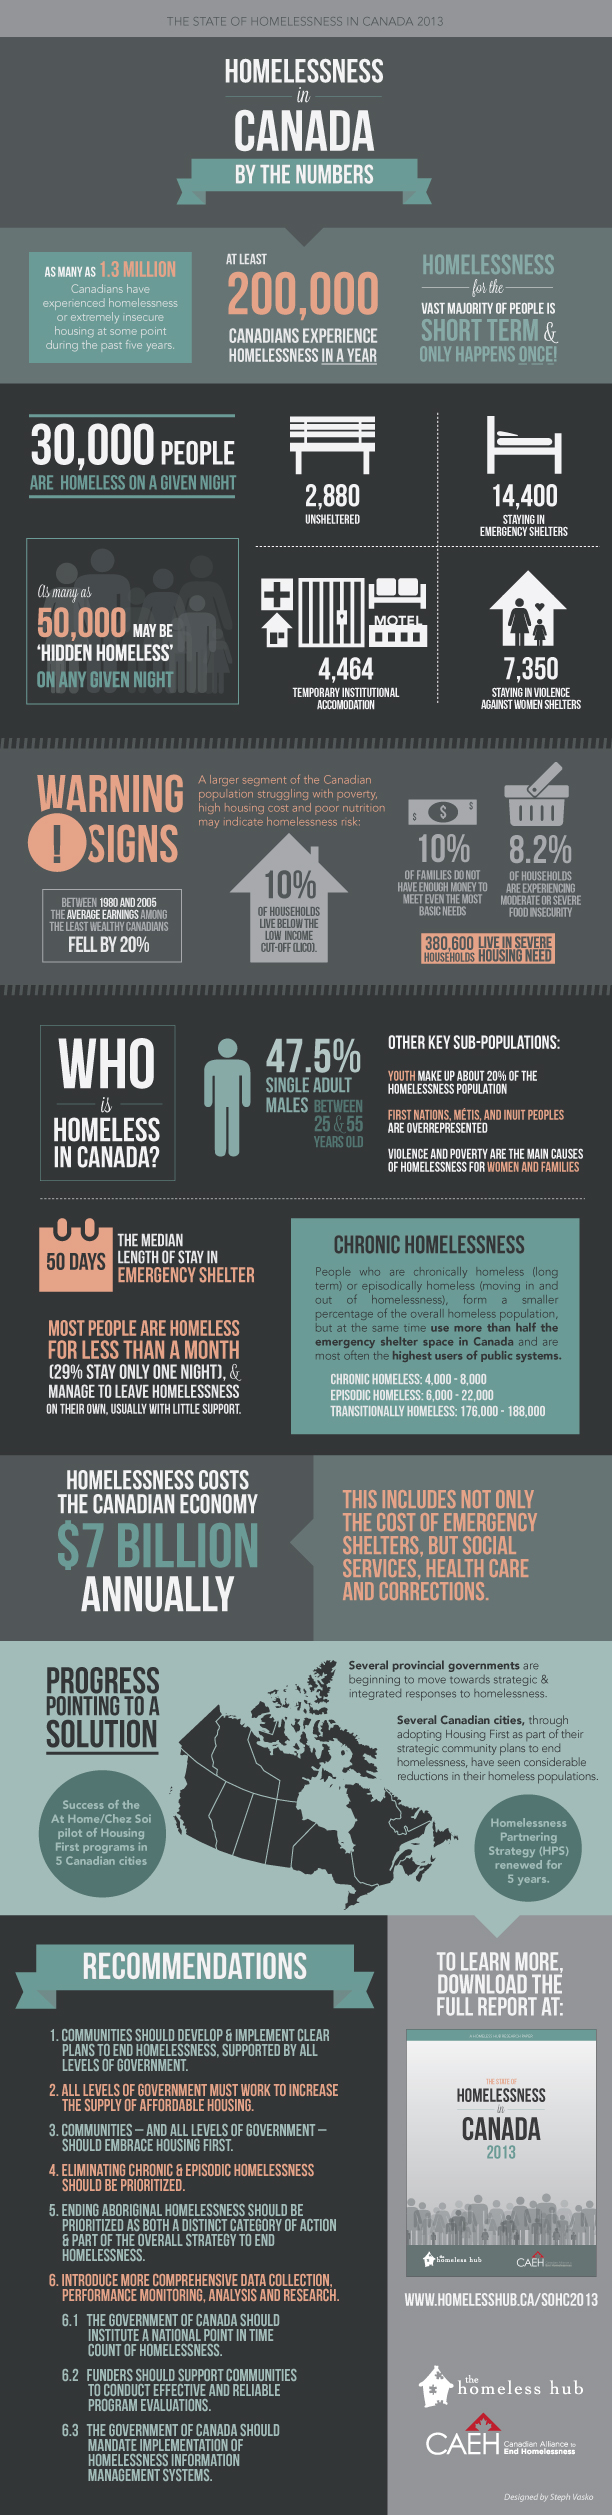 The information for the State of Homelessness in Canada 2013 report has been compiled by the Canadian Homelessness Research Network (Homeless Hub) and the Canadian Alliance to End Homelessness from the best available research to date.